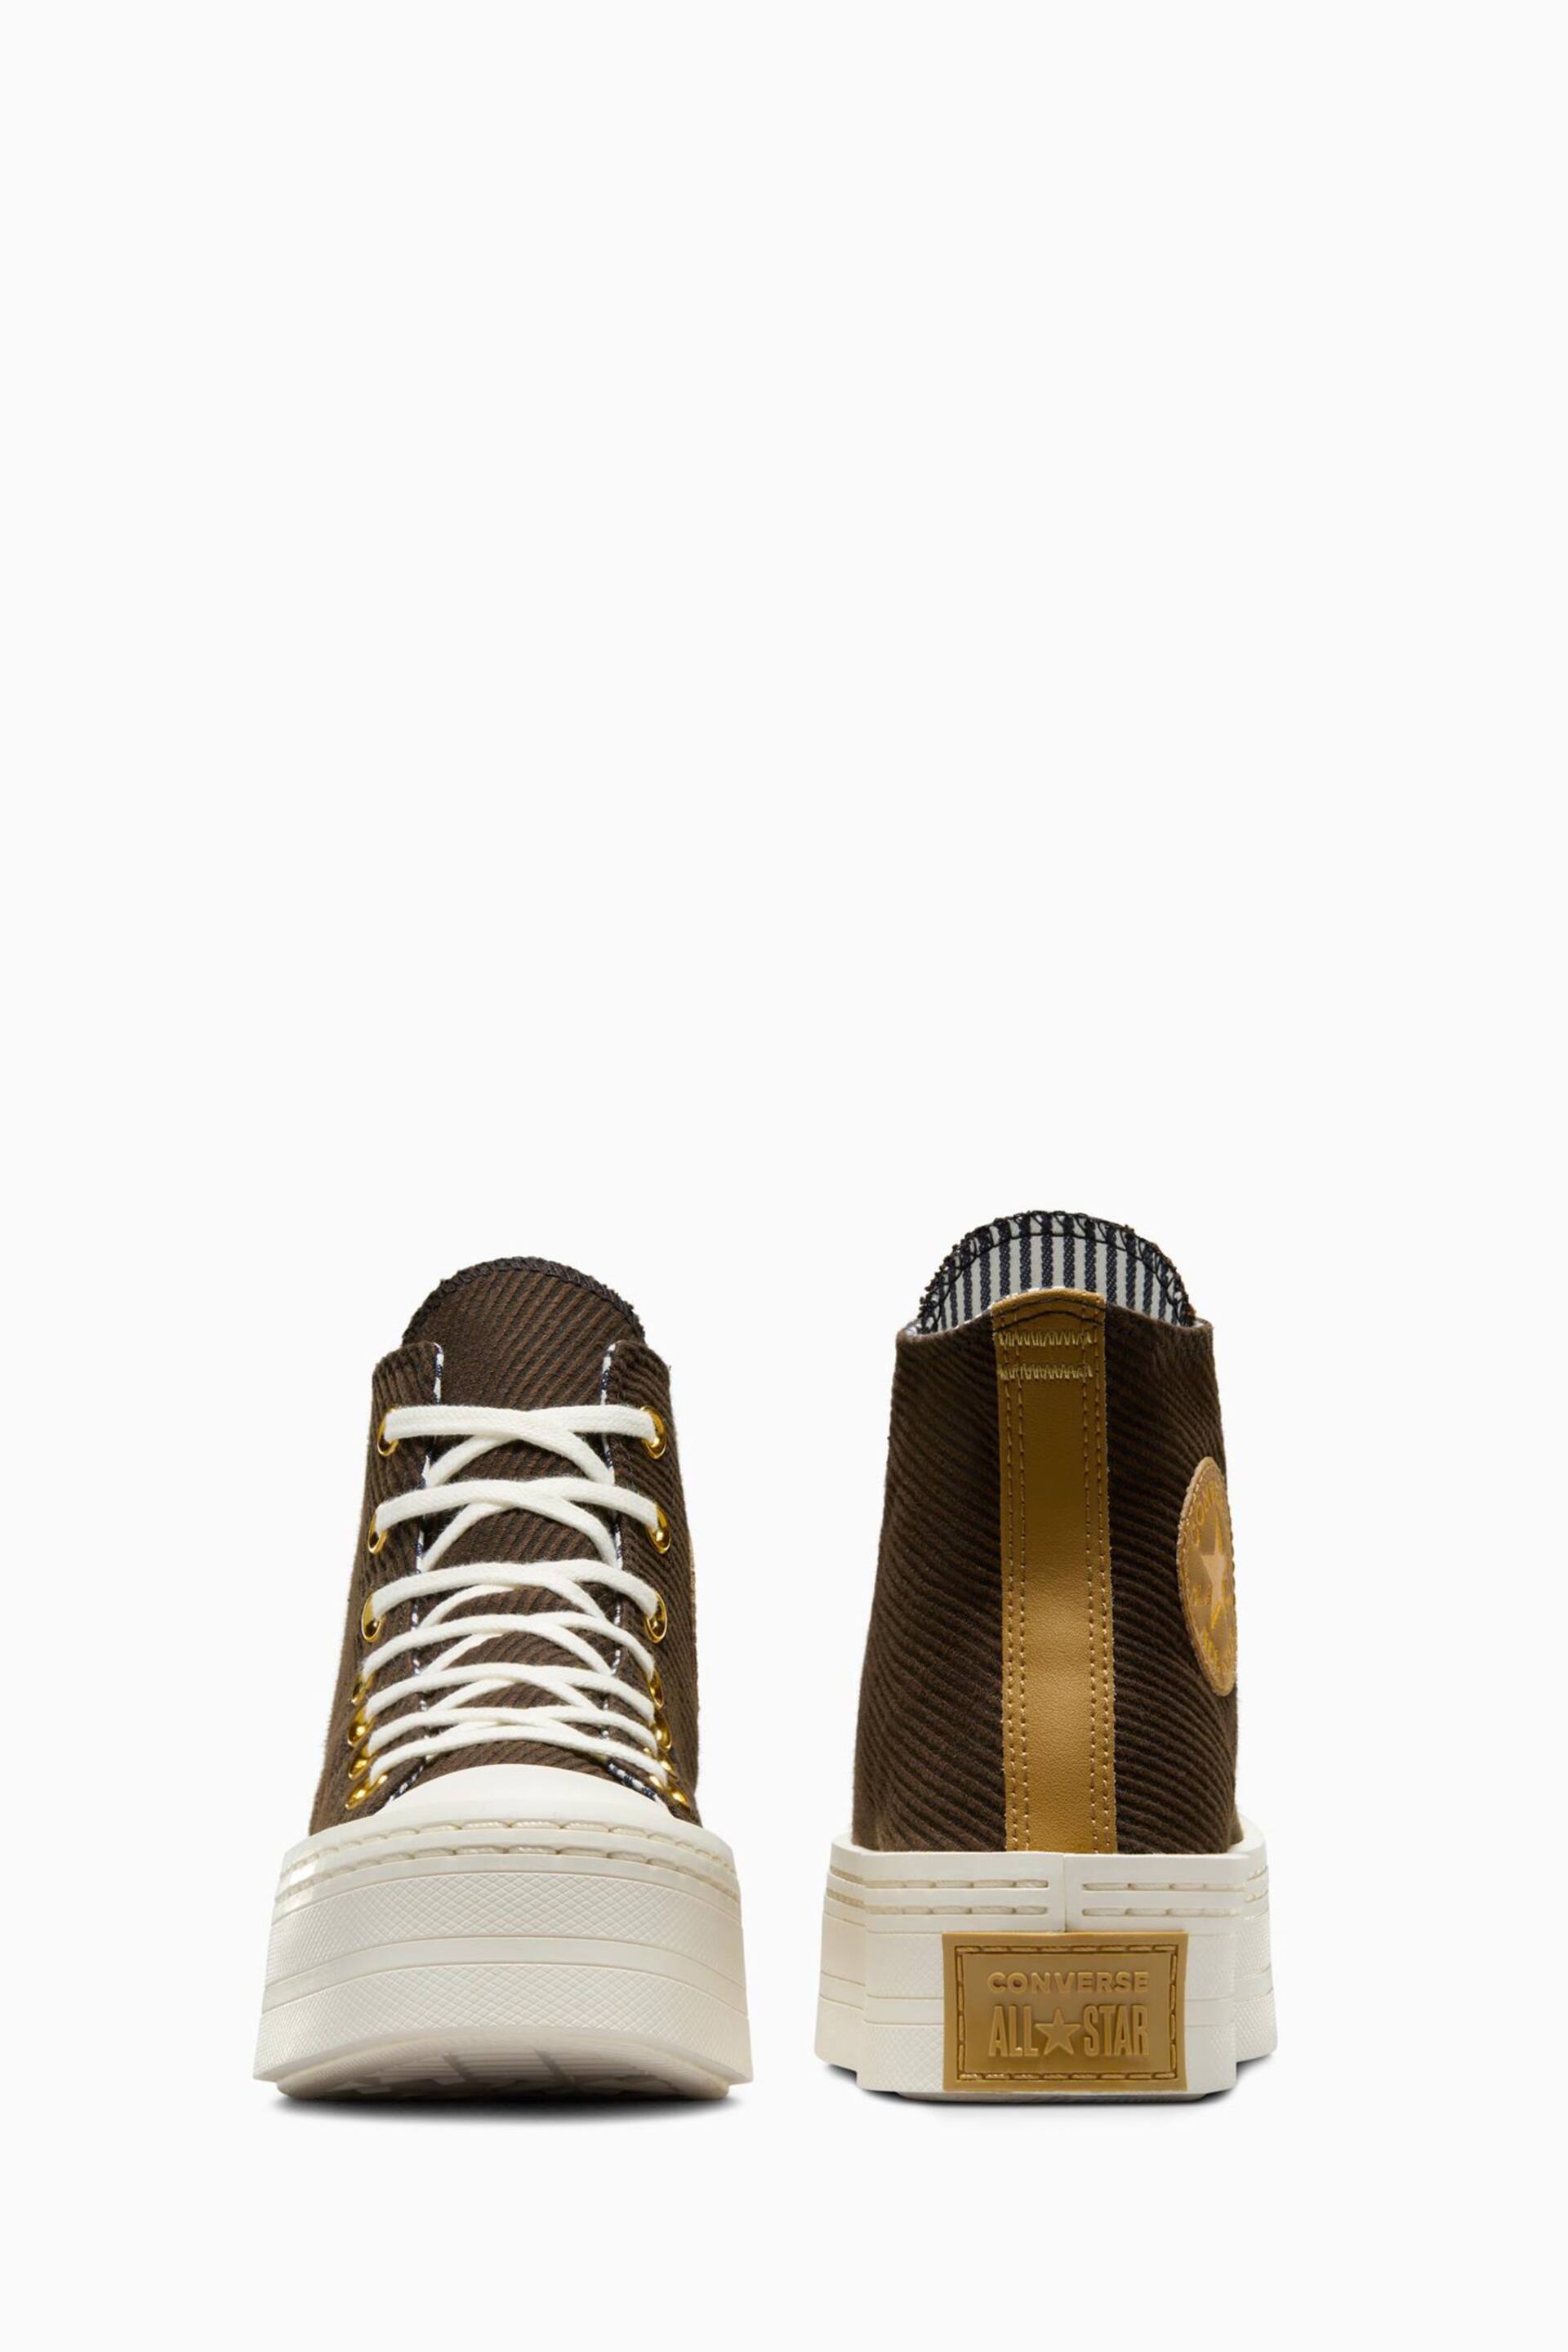 Converse Brown Modern Lift Trainers - Image 6 of 16